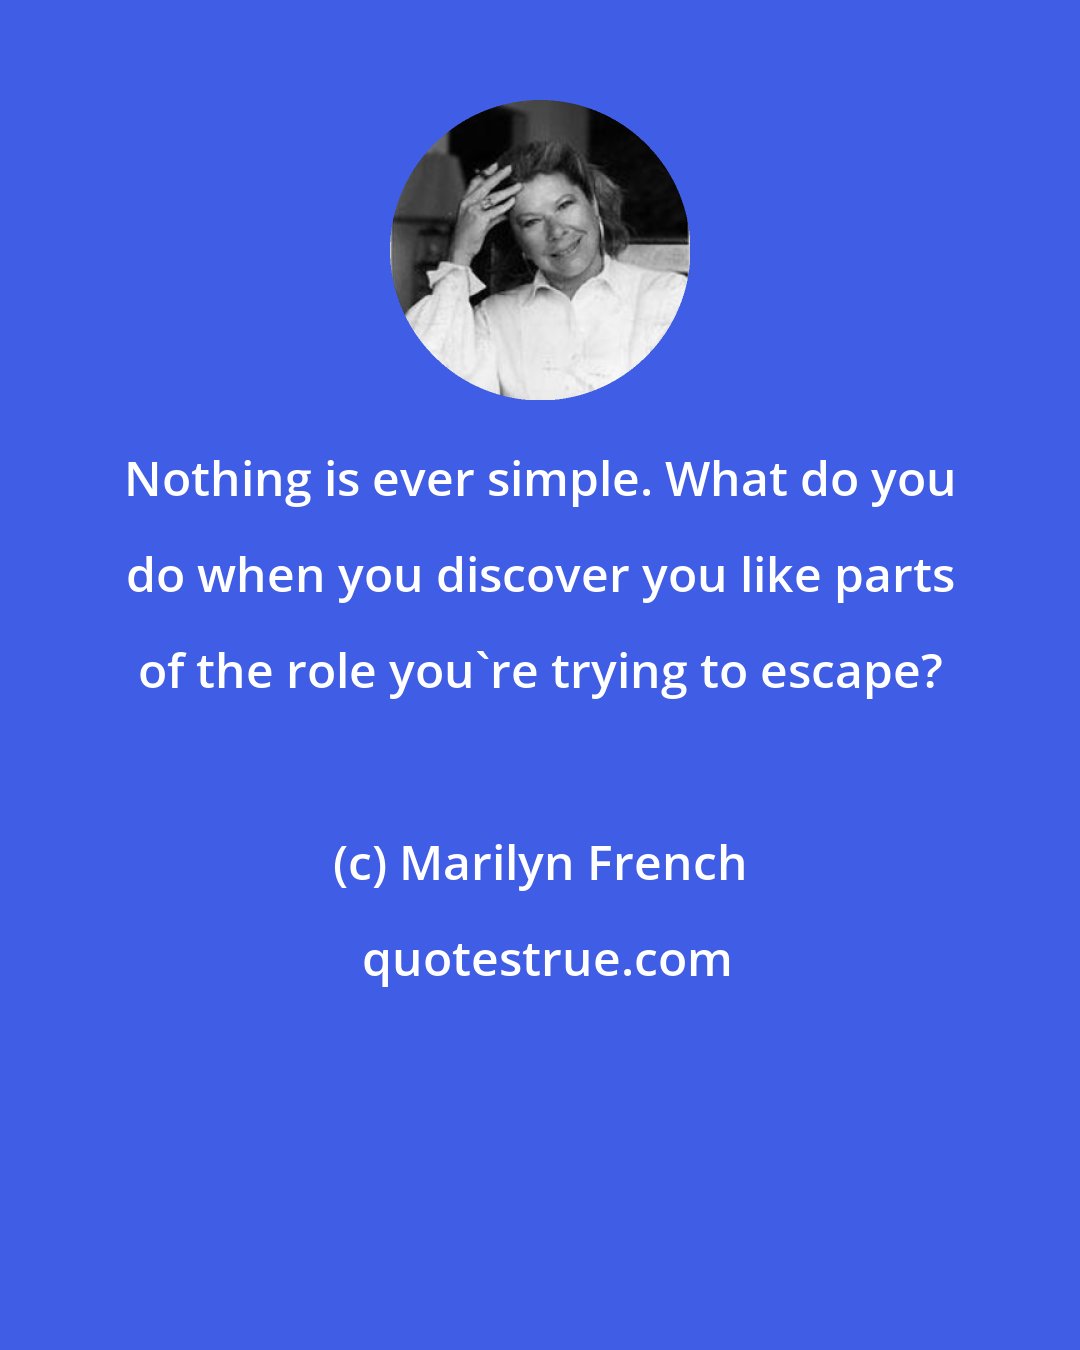 Marilyn French: Nothing is ever simple. What do you do when you discover you like parts of the role you're trying to escape?